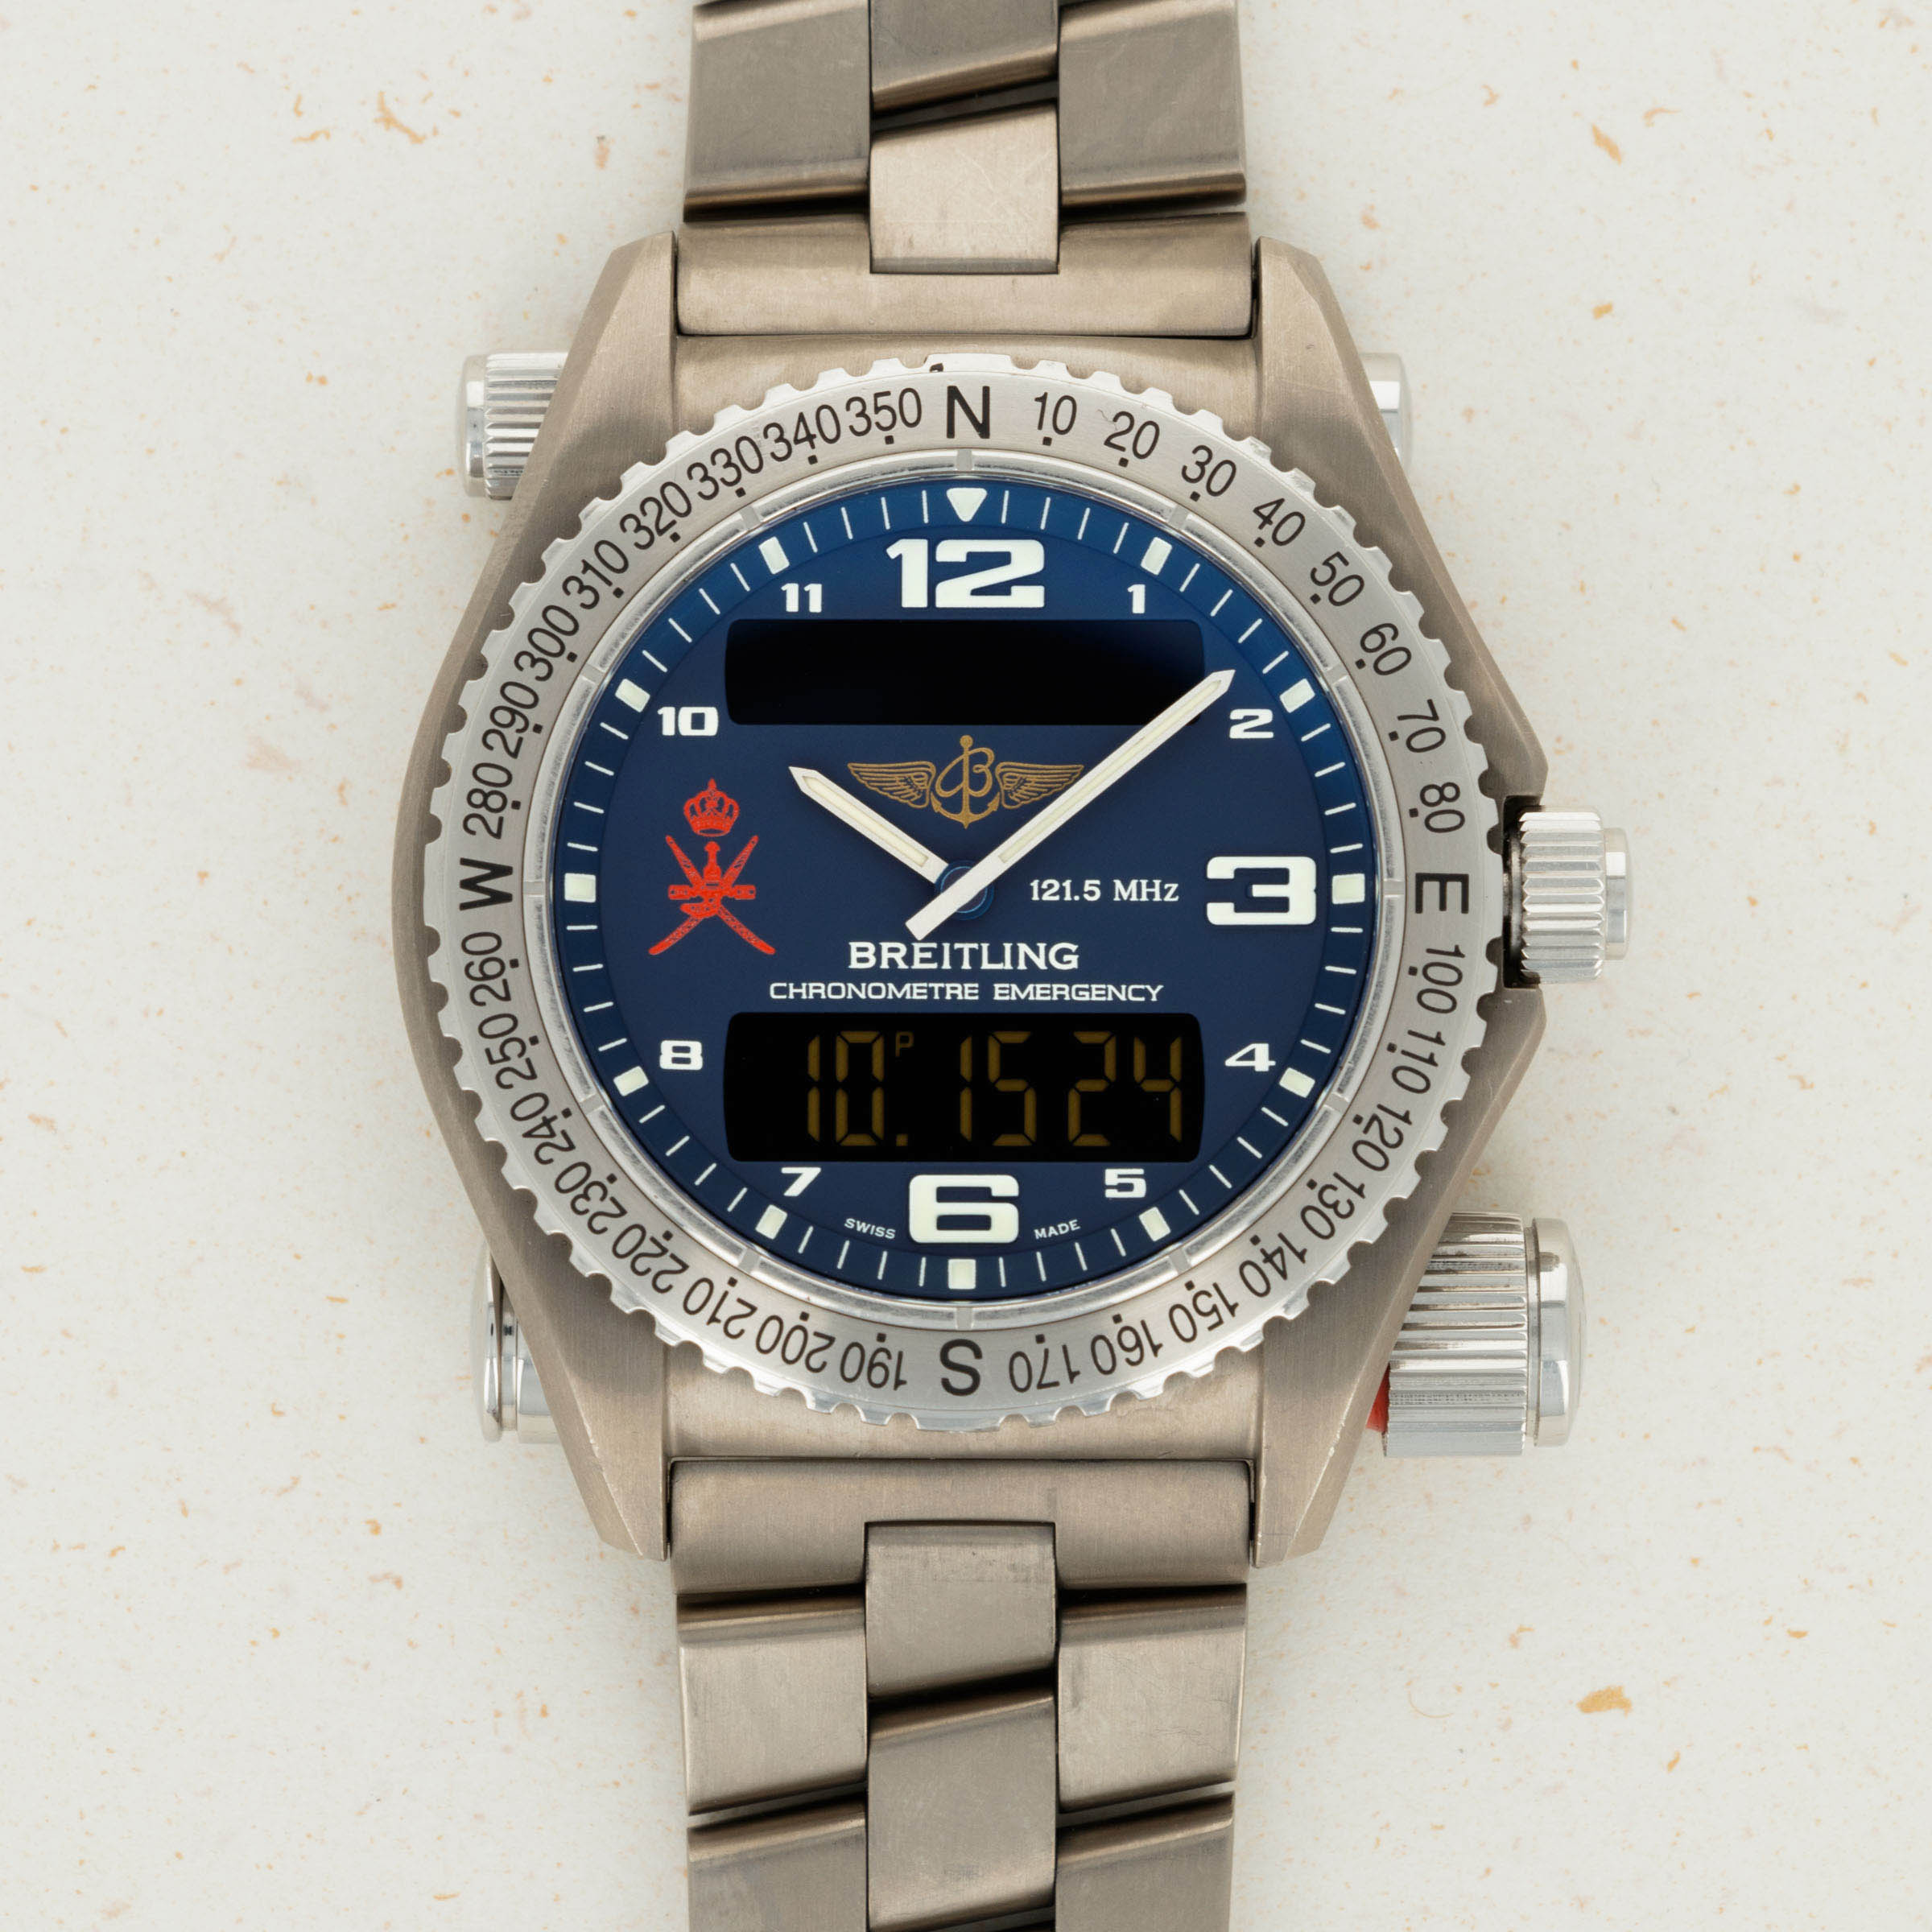 Breitling Emergency E76321 Oman Royal Airforce | Auctions | Loupe This